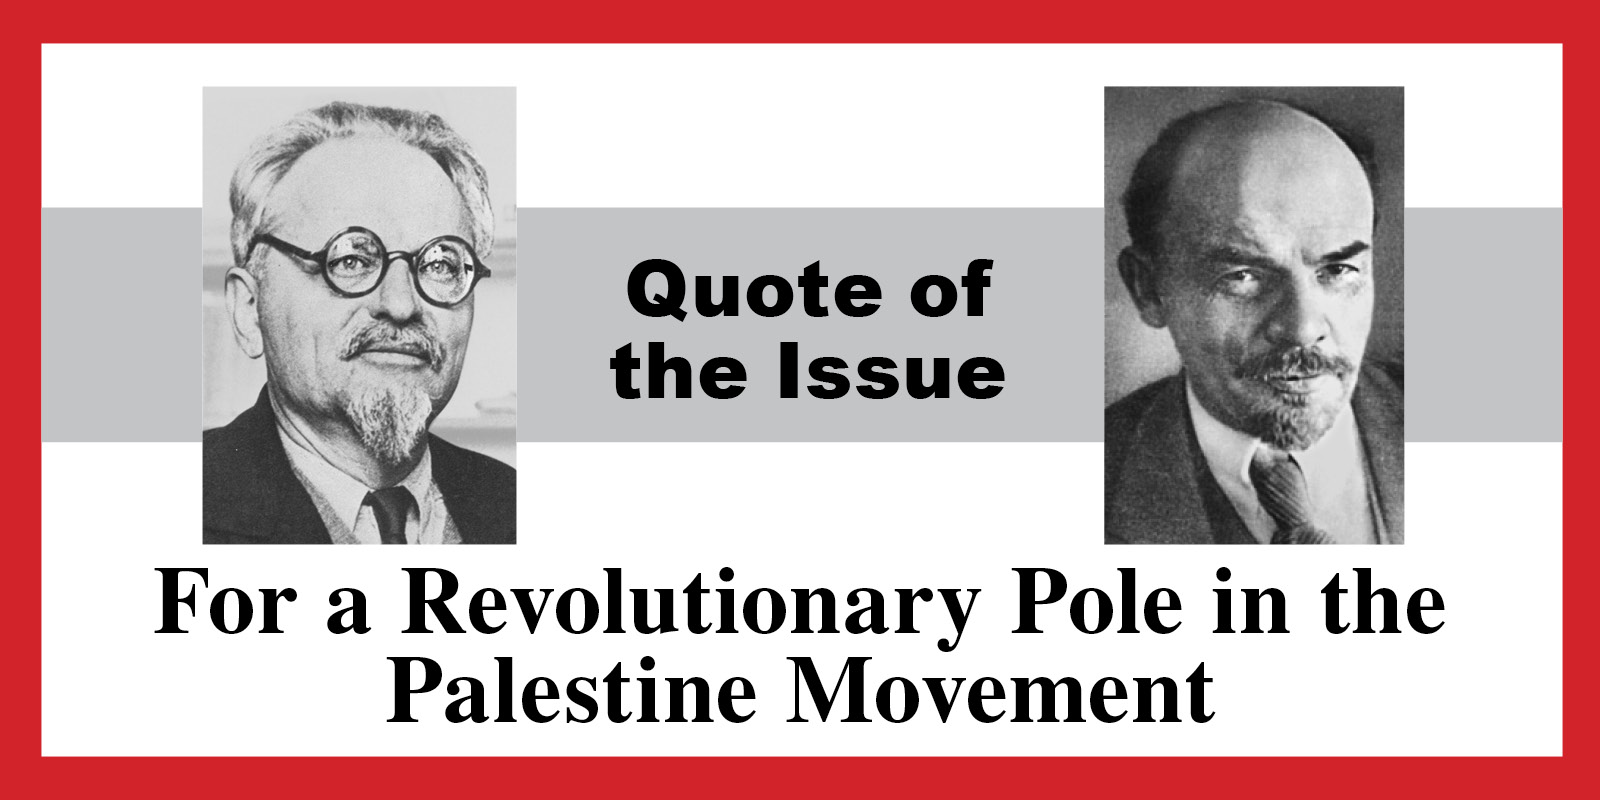 For a Revolutionary Pole in the Palestine Movement